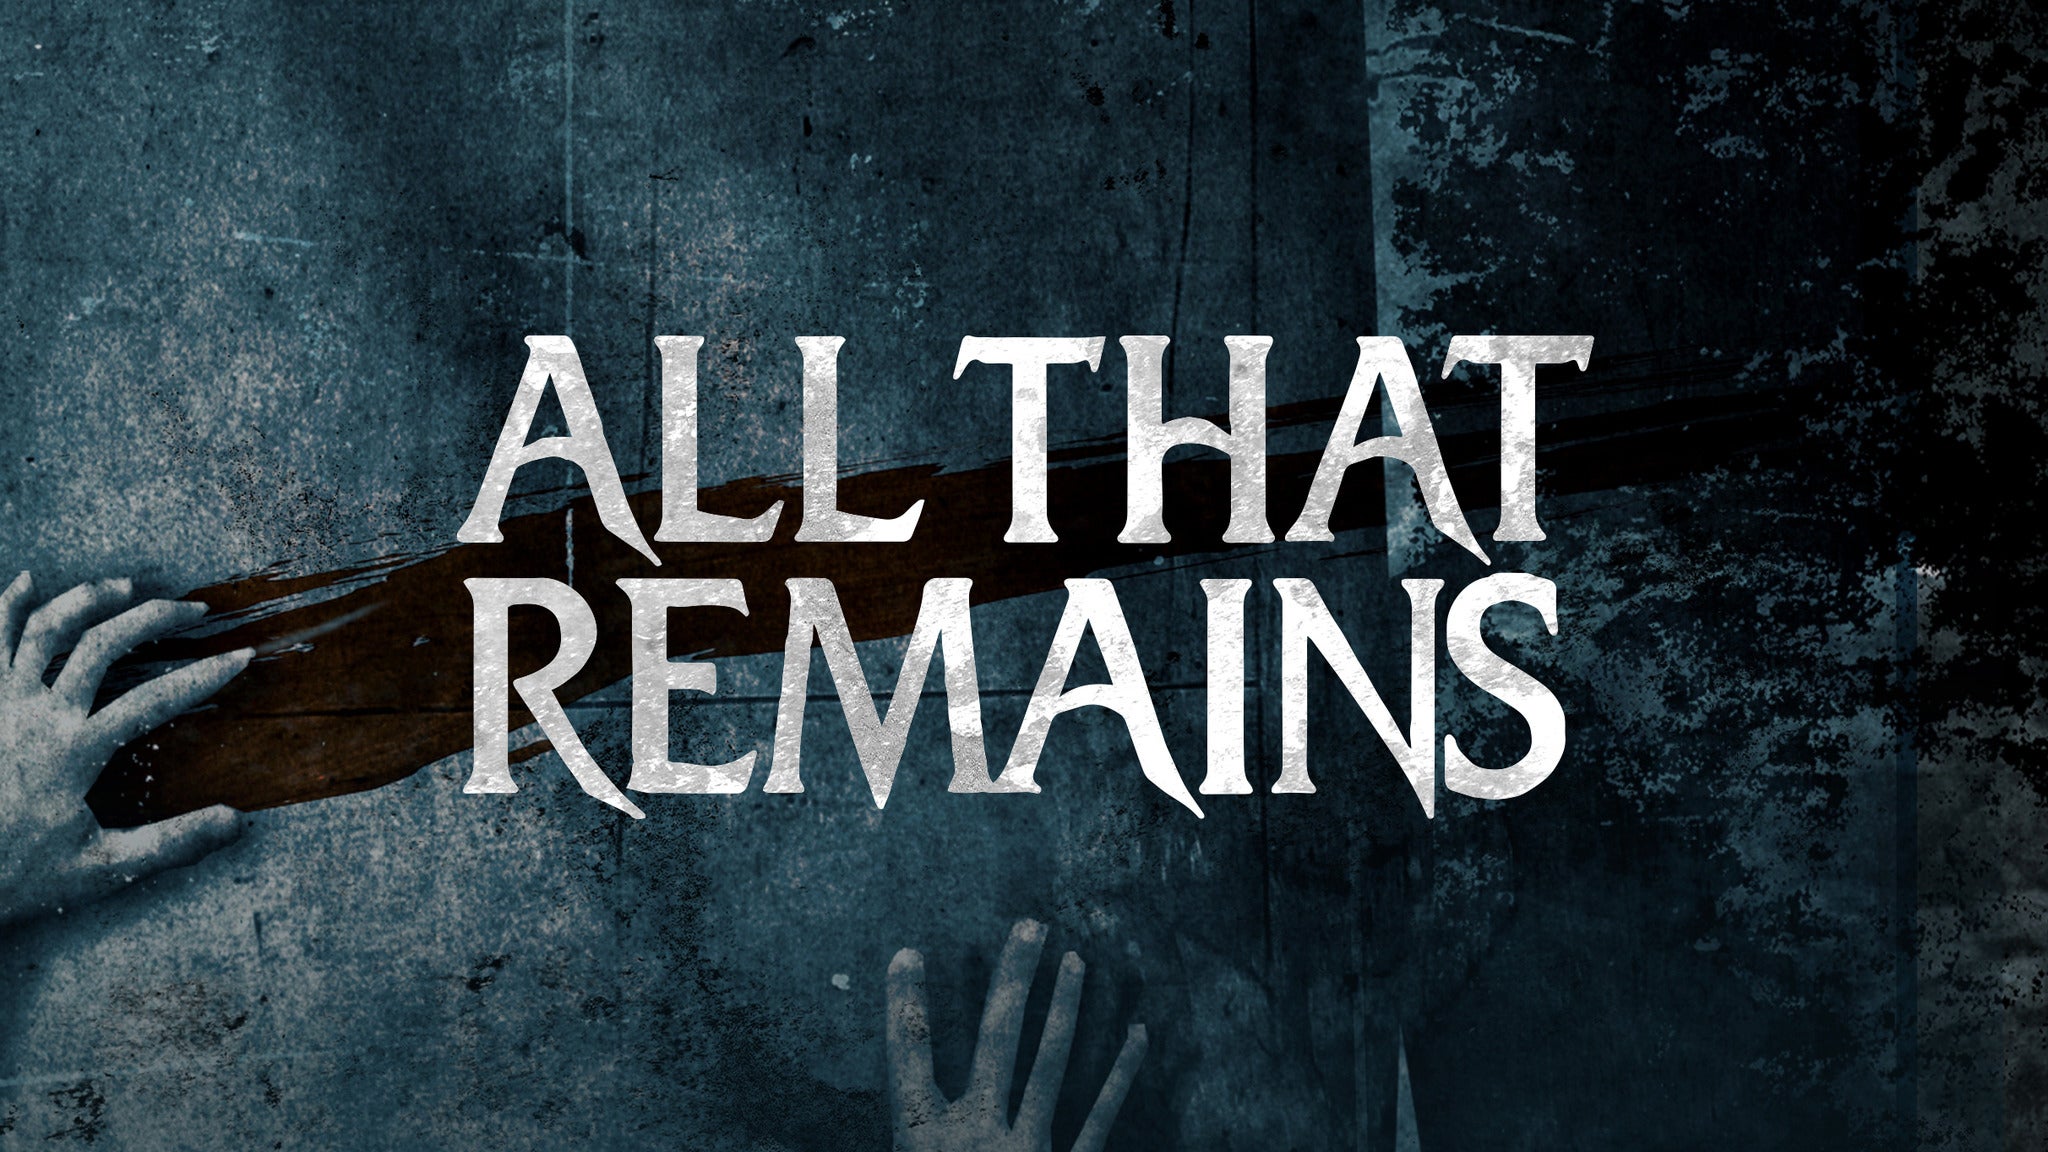 All That Remains - The Fall of Ideals 15th Anniversary